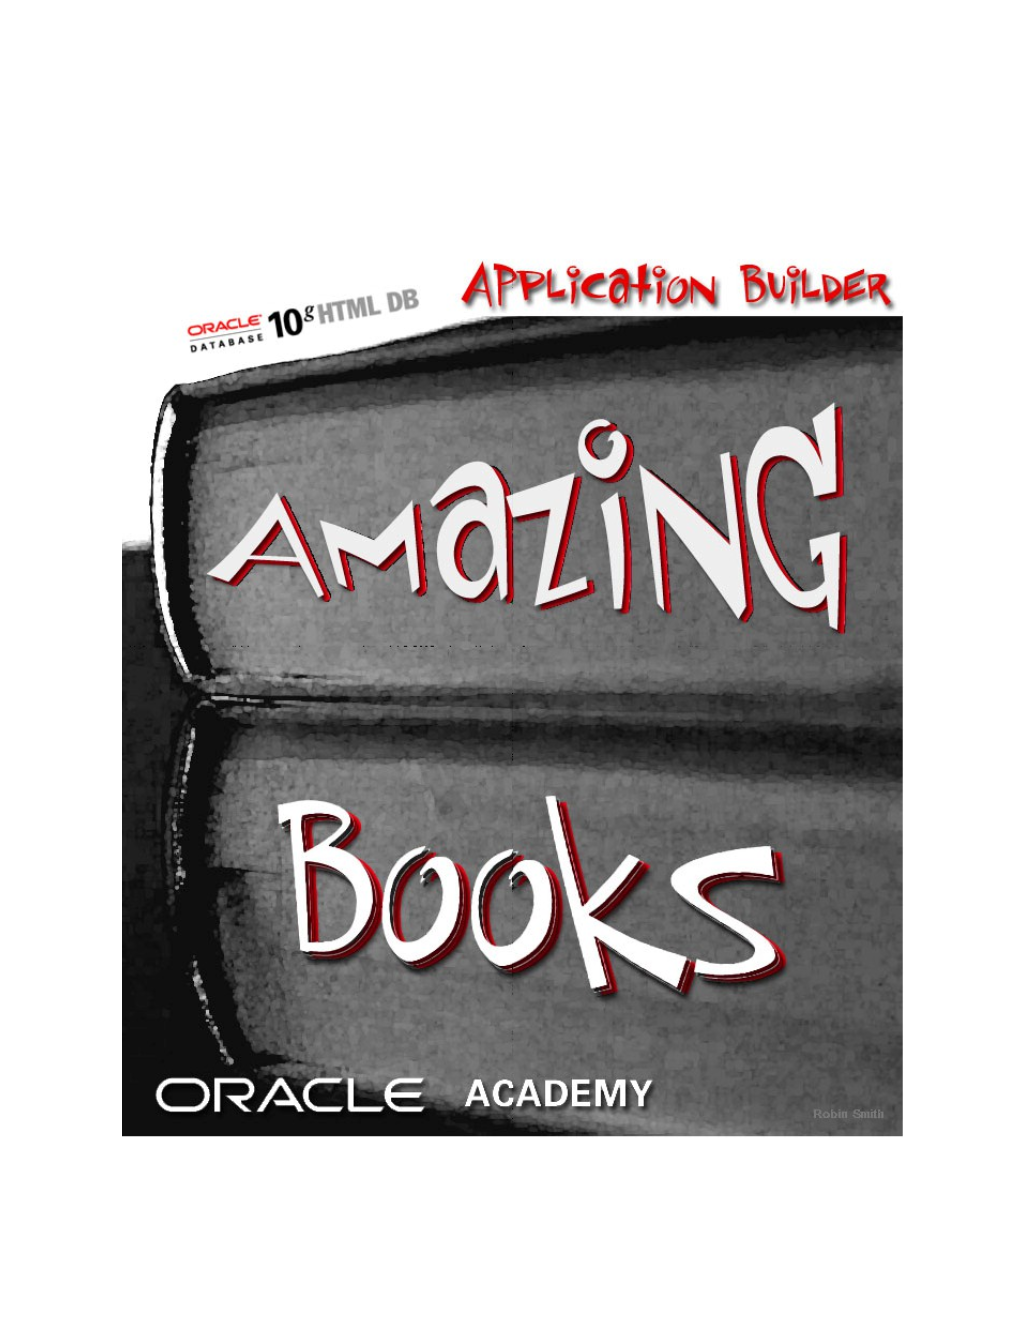 Amazing Books Application Builder Project